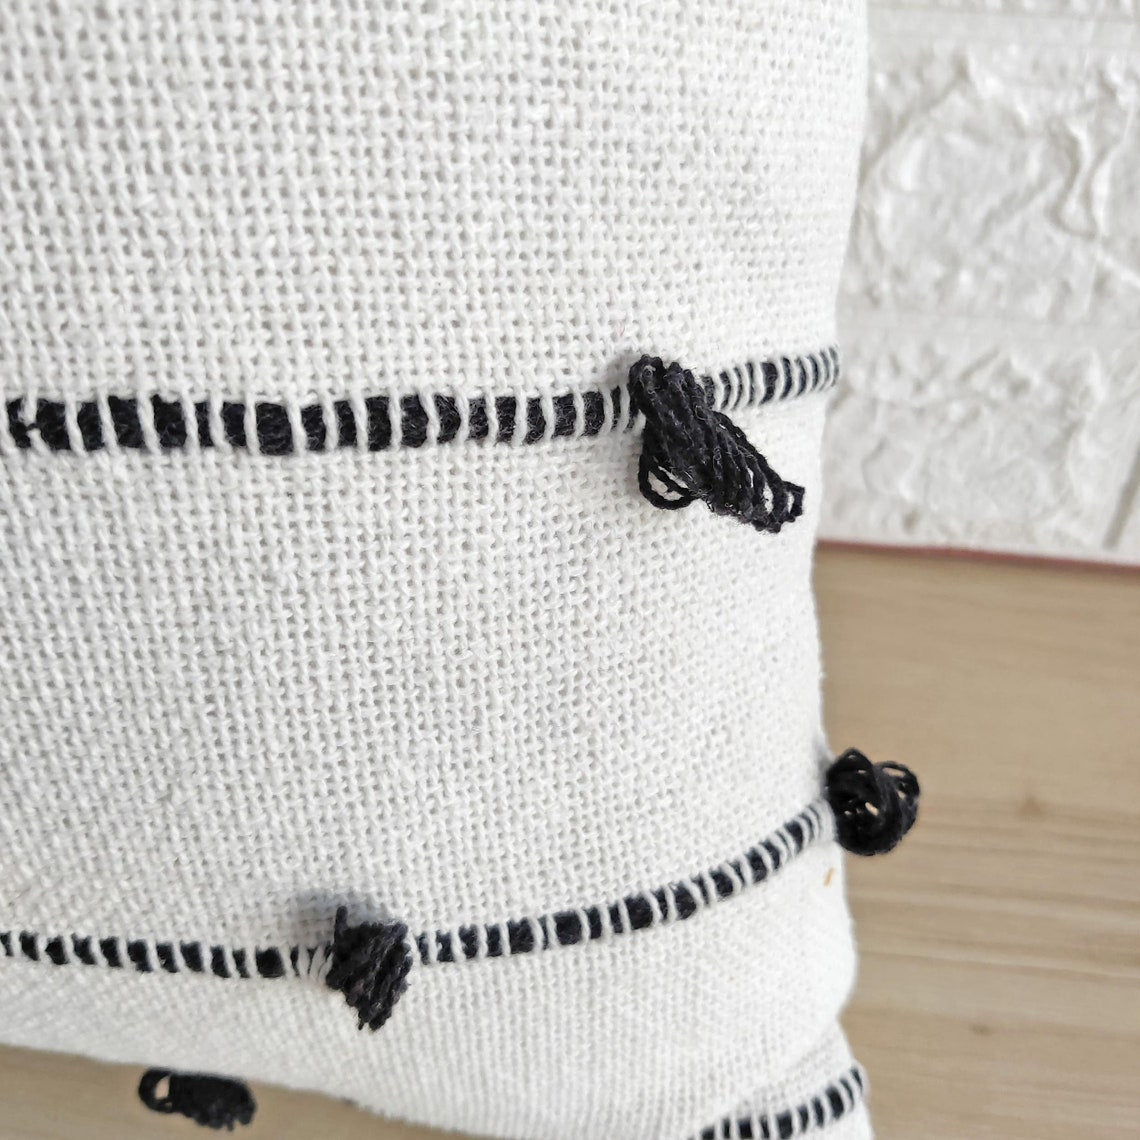 Black & White Natural Raw Cotton Hand Loom Woven Textured Fabric Cushion Cover